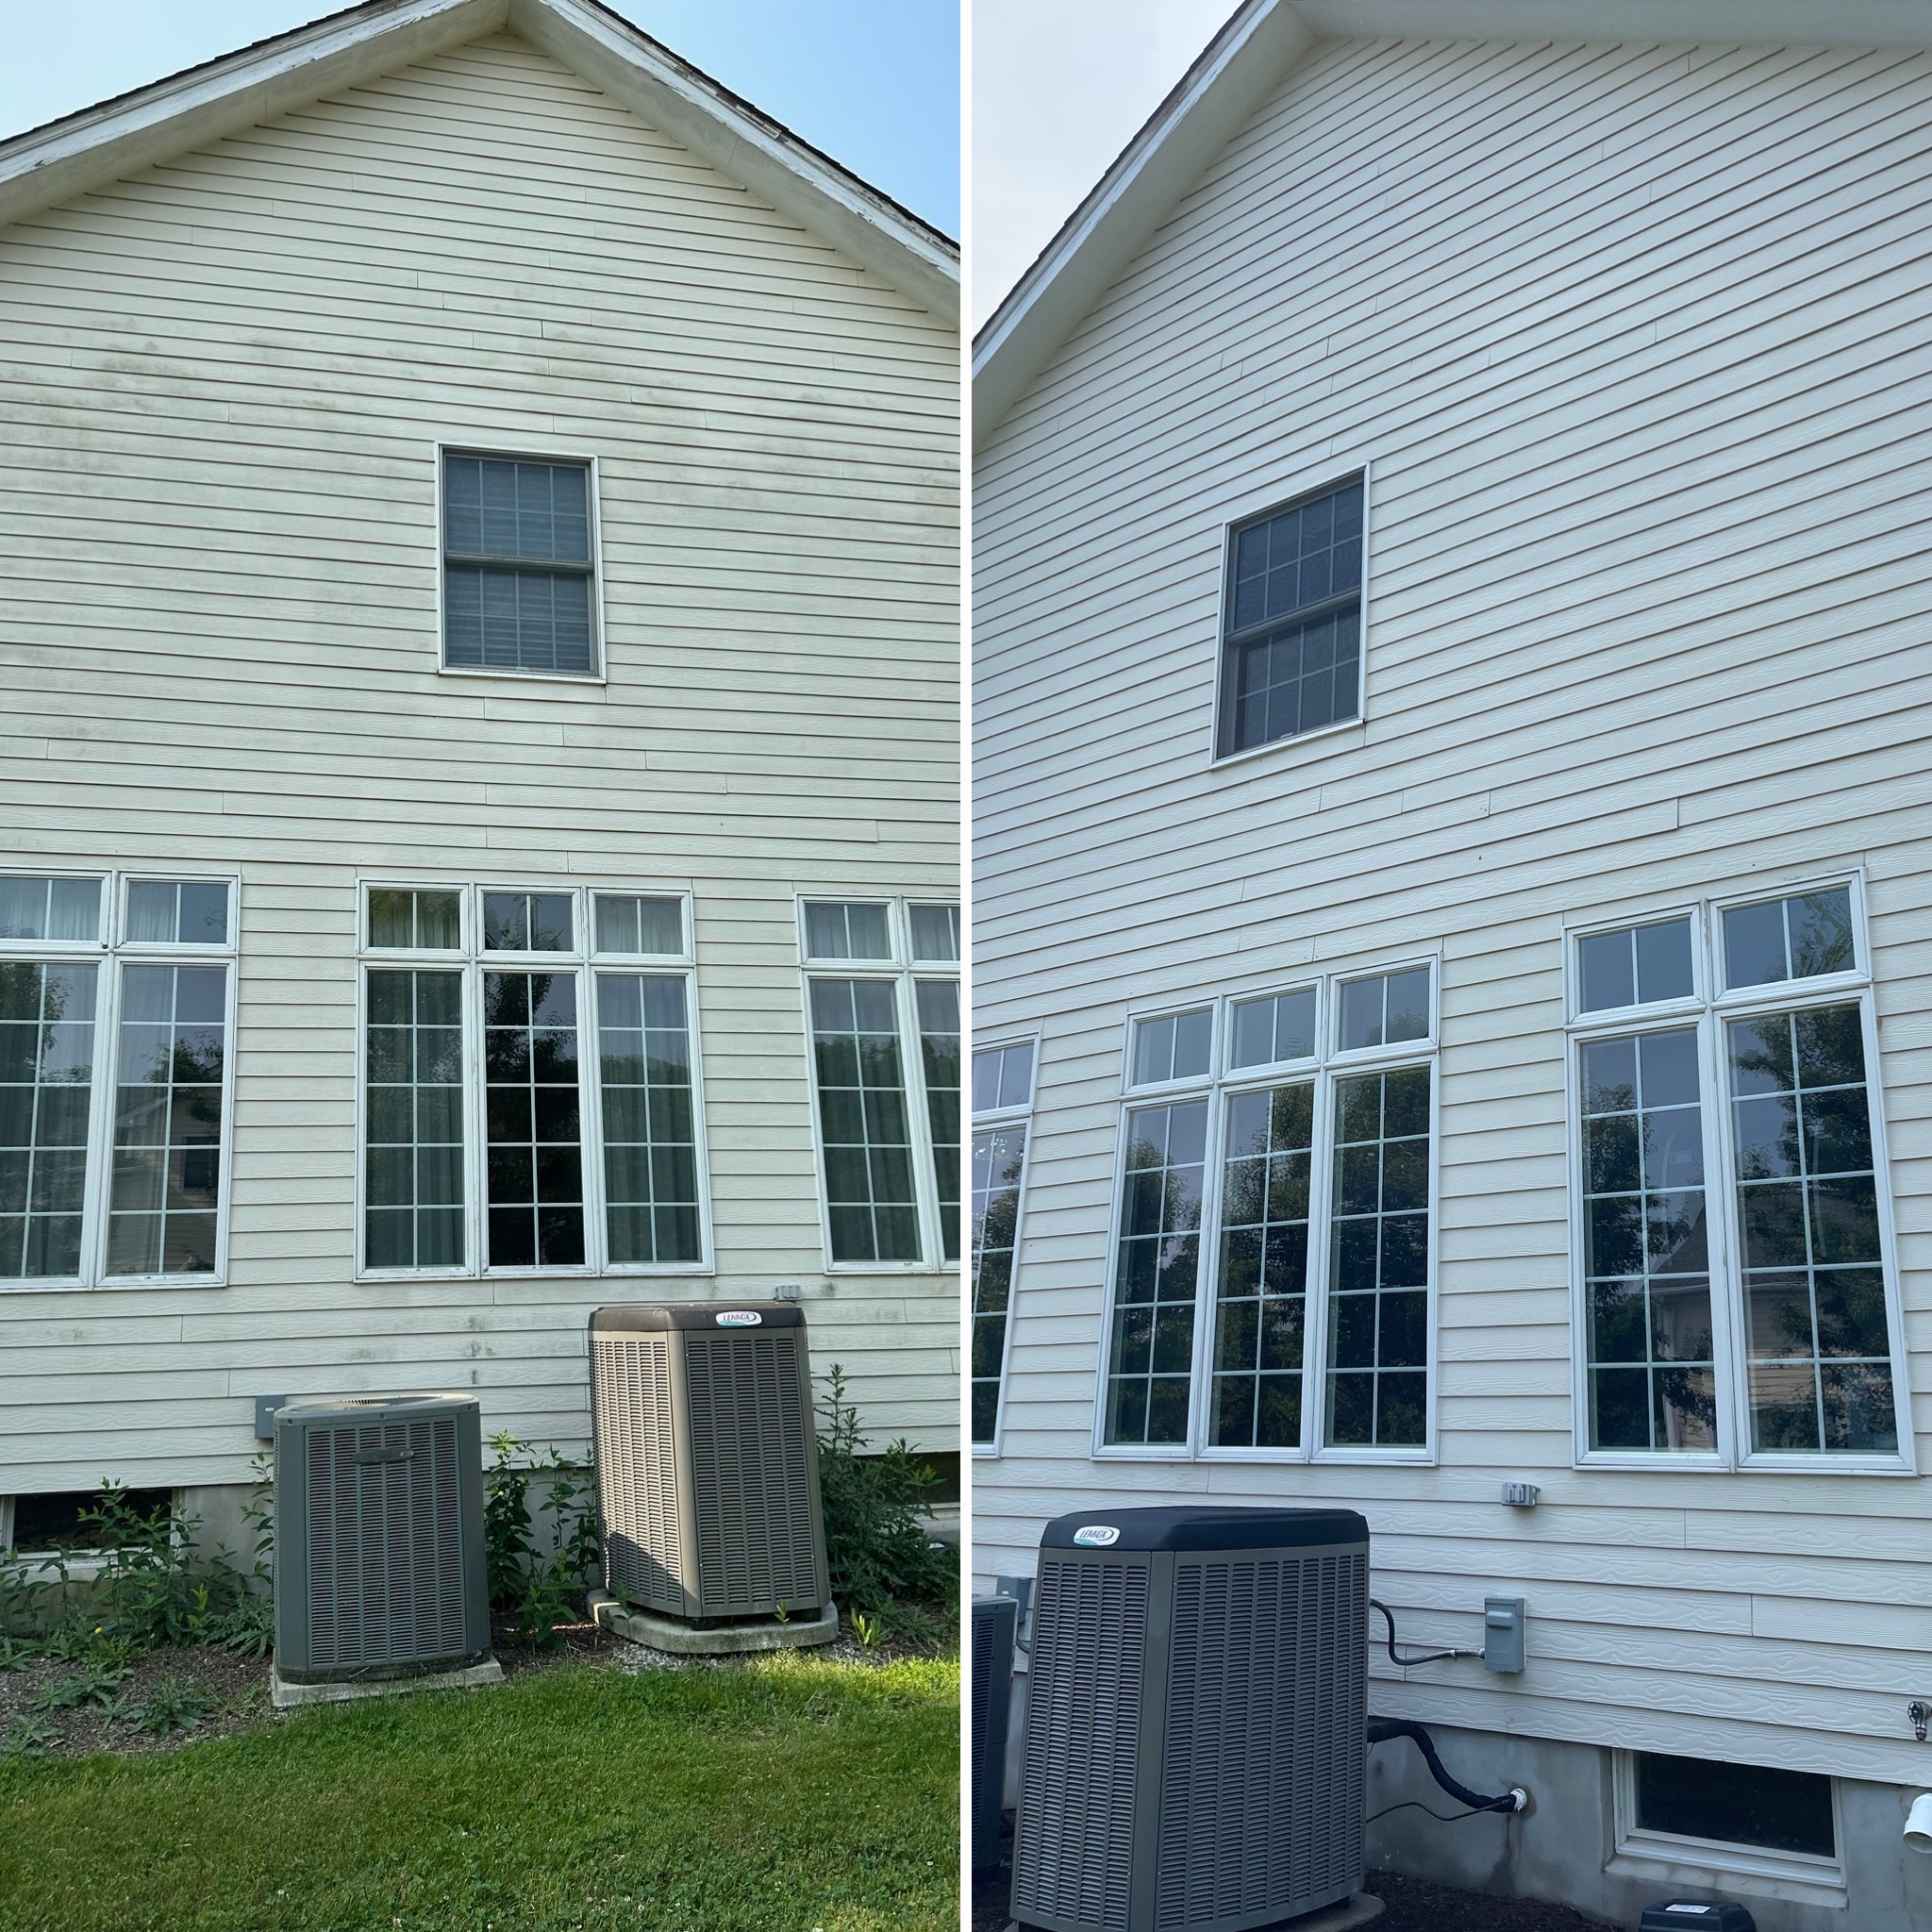 House wash in Flemington NJ for a client looking to sell! Thumbnail